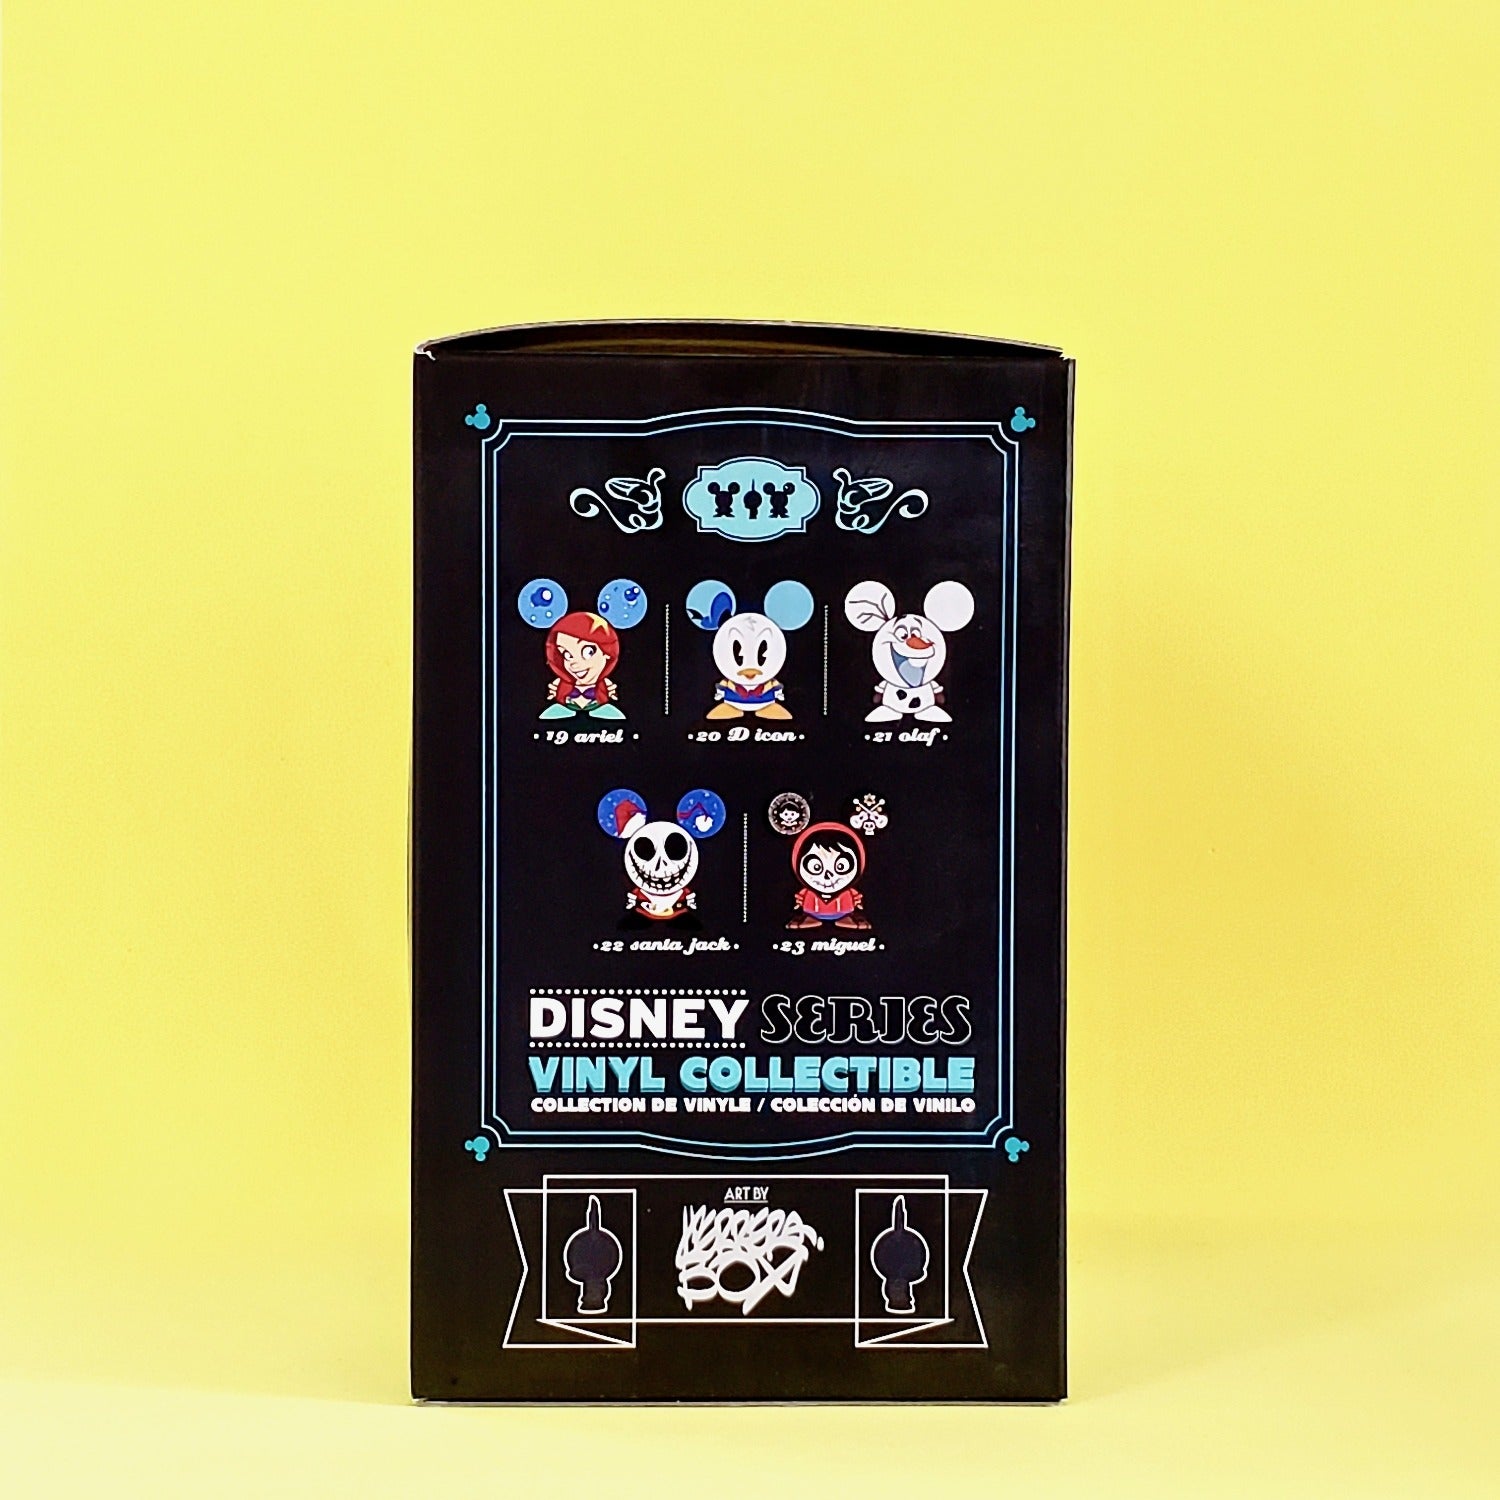 Disney Shorts Series 2 Coco Miguel box side view